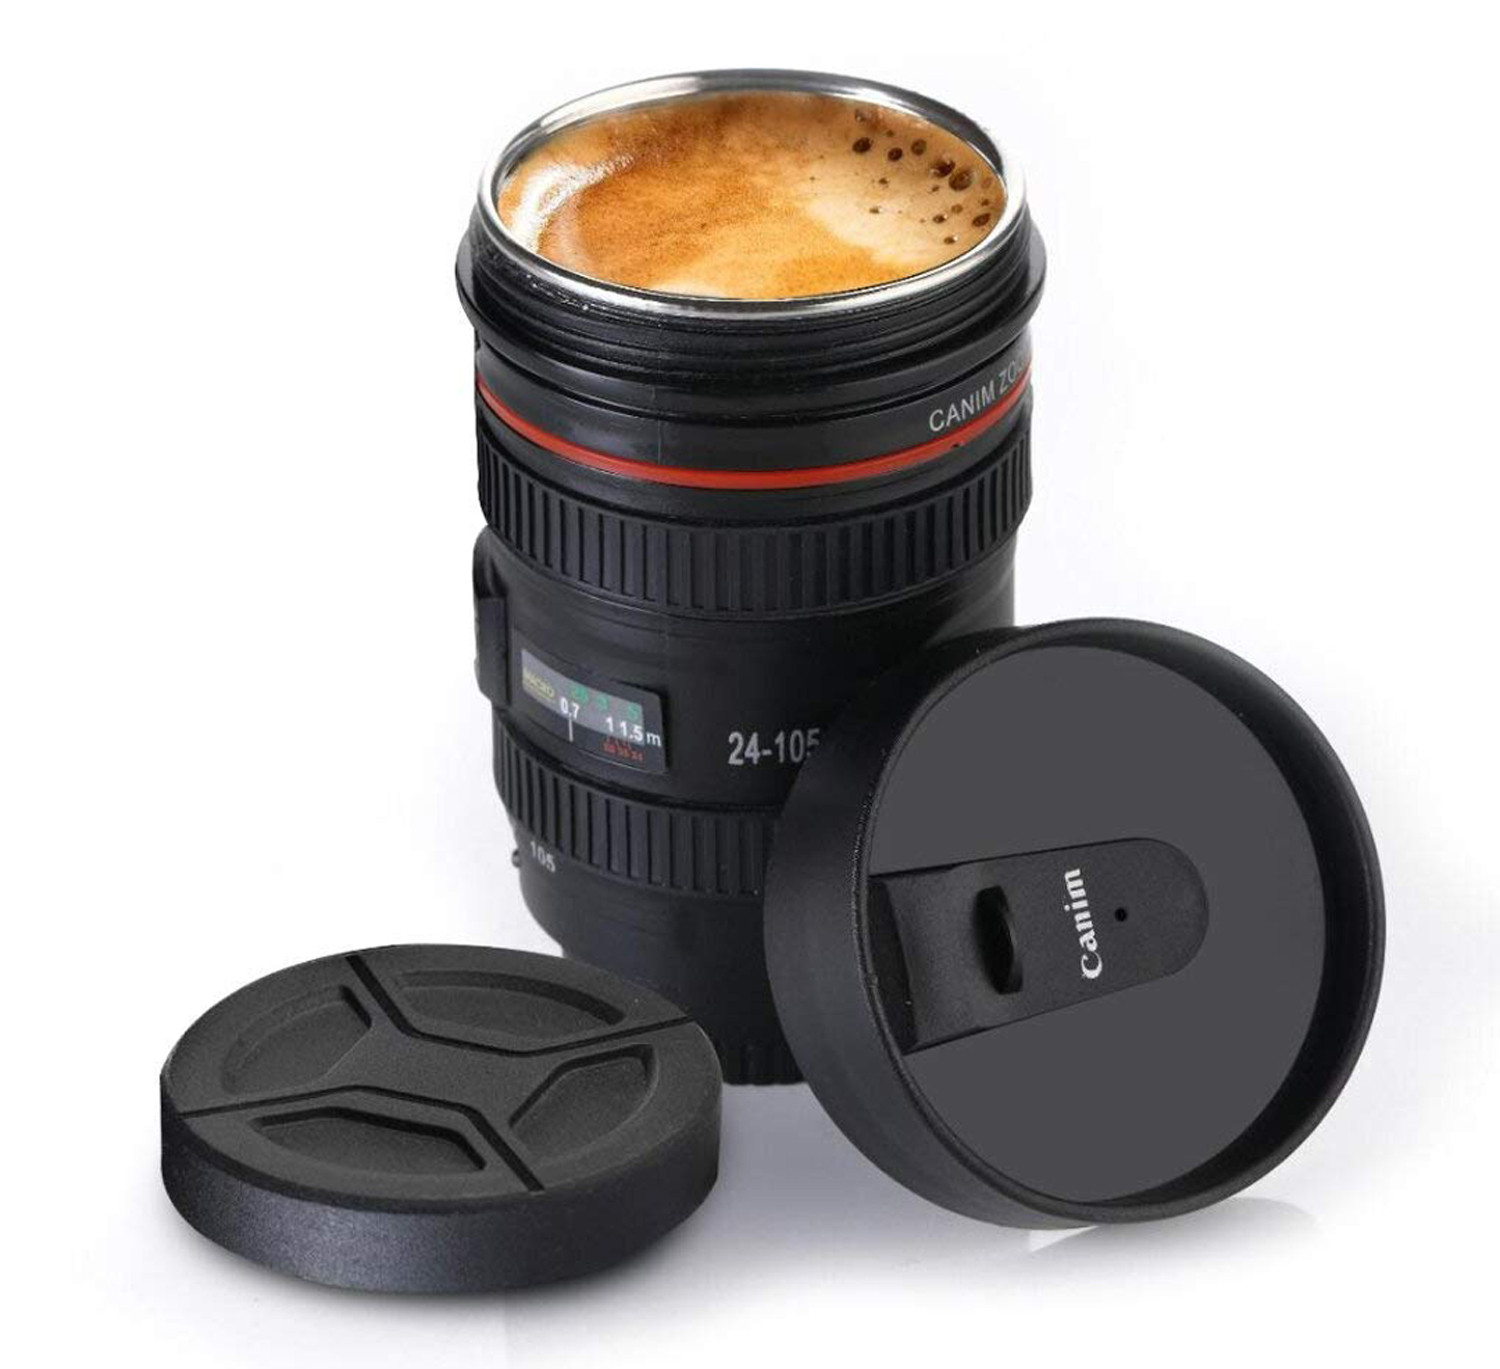 Kuber Industries Coffee Mug, Camera Lens Travel Thermos, Stainless Steel Insulated Cup with Easy Clean Lid (Black)